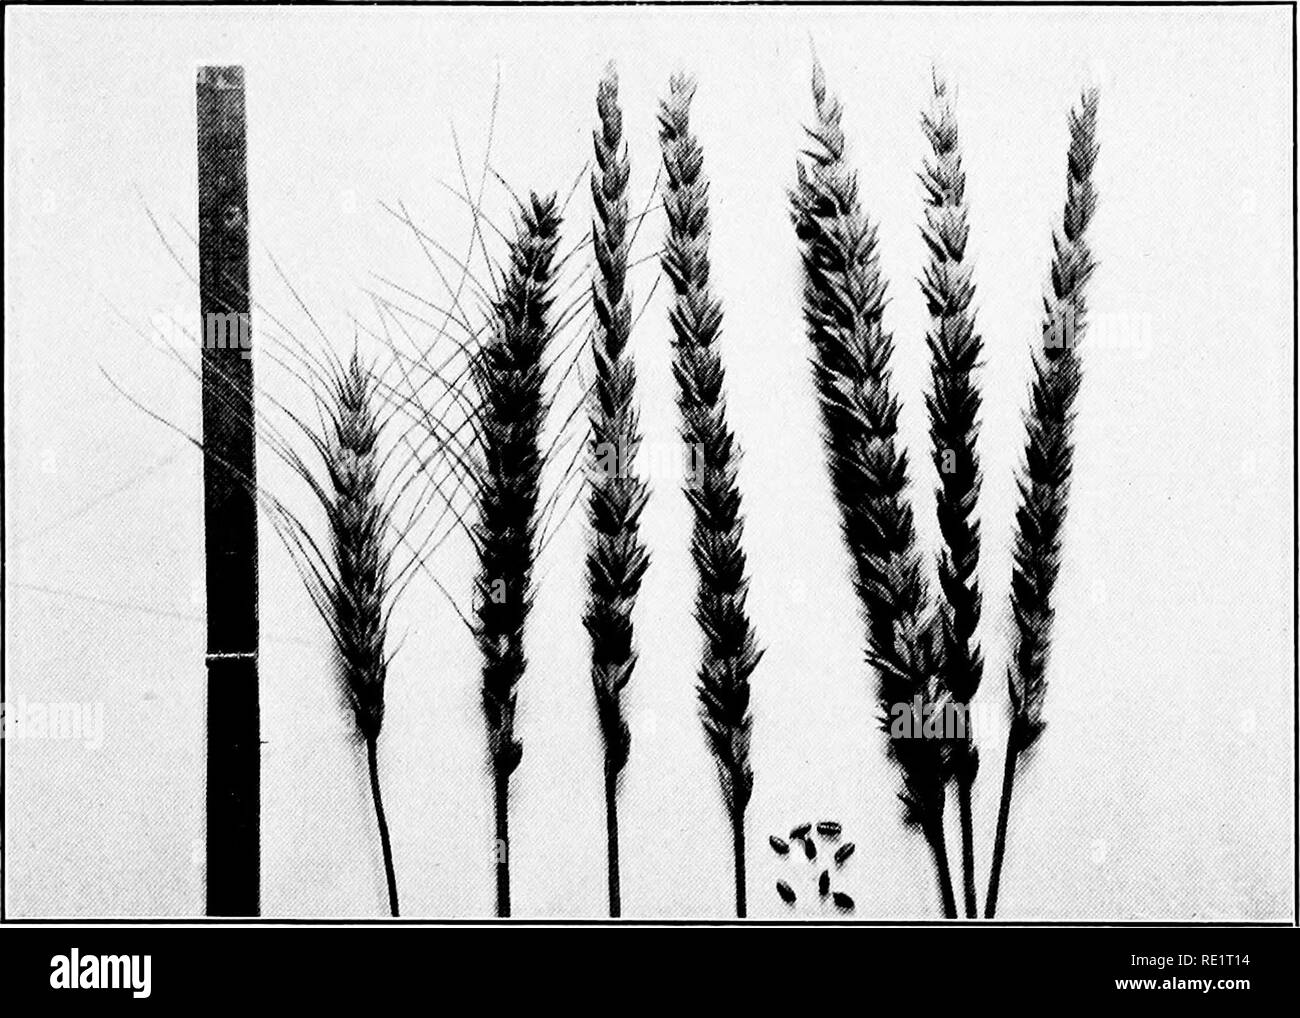 . Arid agriculture; a hand-book for the western farmer and stockman. Dry farming; Irrigation. AKID AGKICULTURE. 229 sity. This was followed by all the variety of other things which men could exist without. At. Plate XLI. Wheat Breeding by the Author. 1. Common Form of Turkey Red Winter Wheat. 2. Improved Turkey Wheat. 3. A New Beardless Winter Wheat—Scale at Left. the present time not only the mere necessities, but the luxuries as well, are actually supplied to the world by one-third of the working population who are producers.. Please note that these images are extracted from scanned page ima Stock Photo